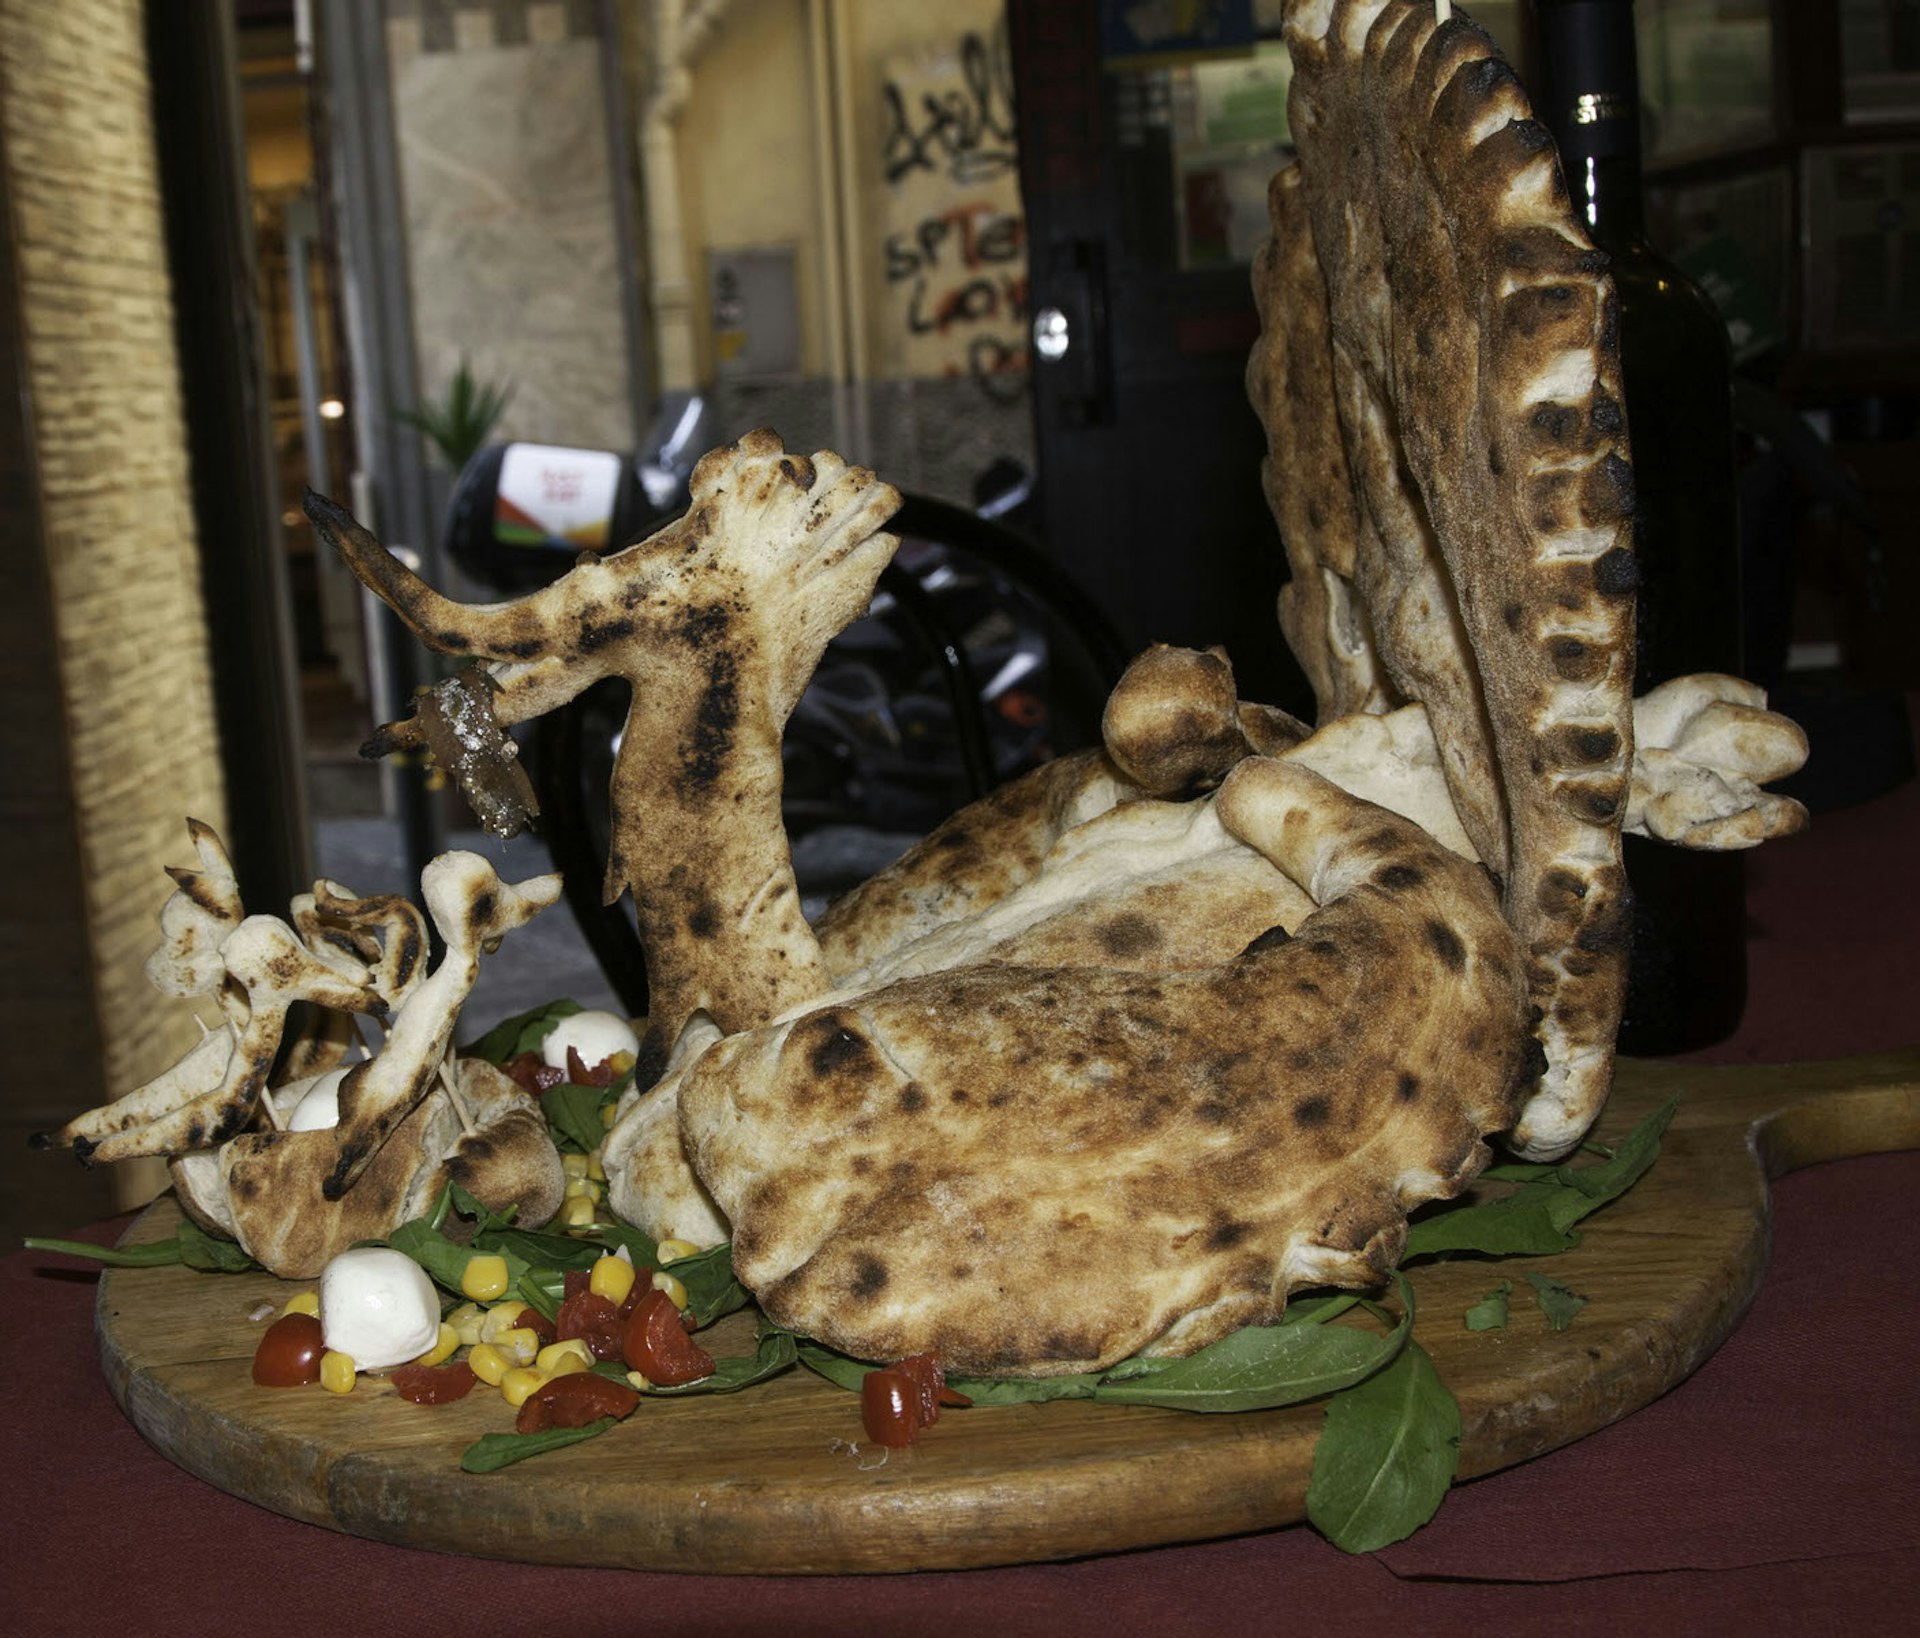 Carmine Mauro's incredible peacock-shaped pizza © Kristin Melia / Lonely Planet